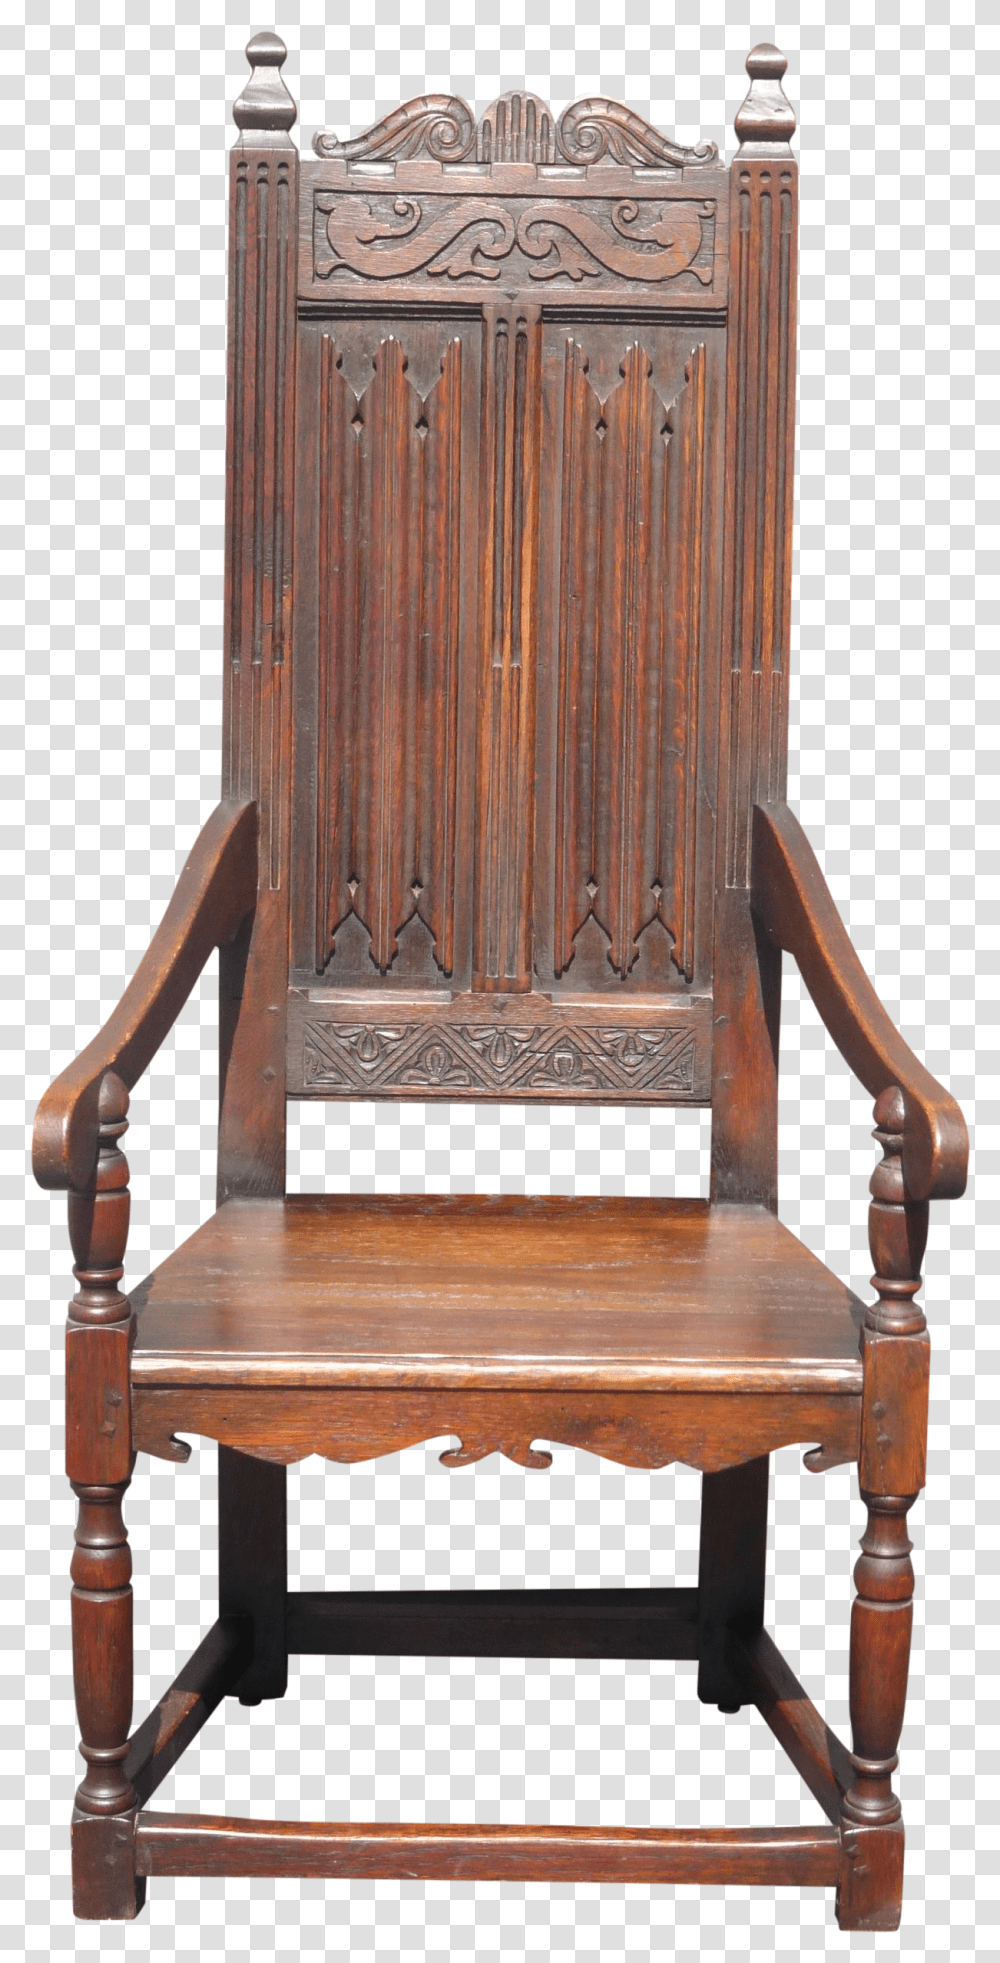 Wooden Throne Dining Chair, Furniture, Armchair Transparent Png